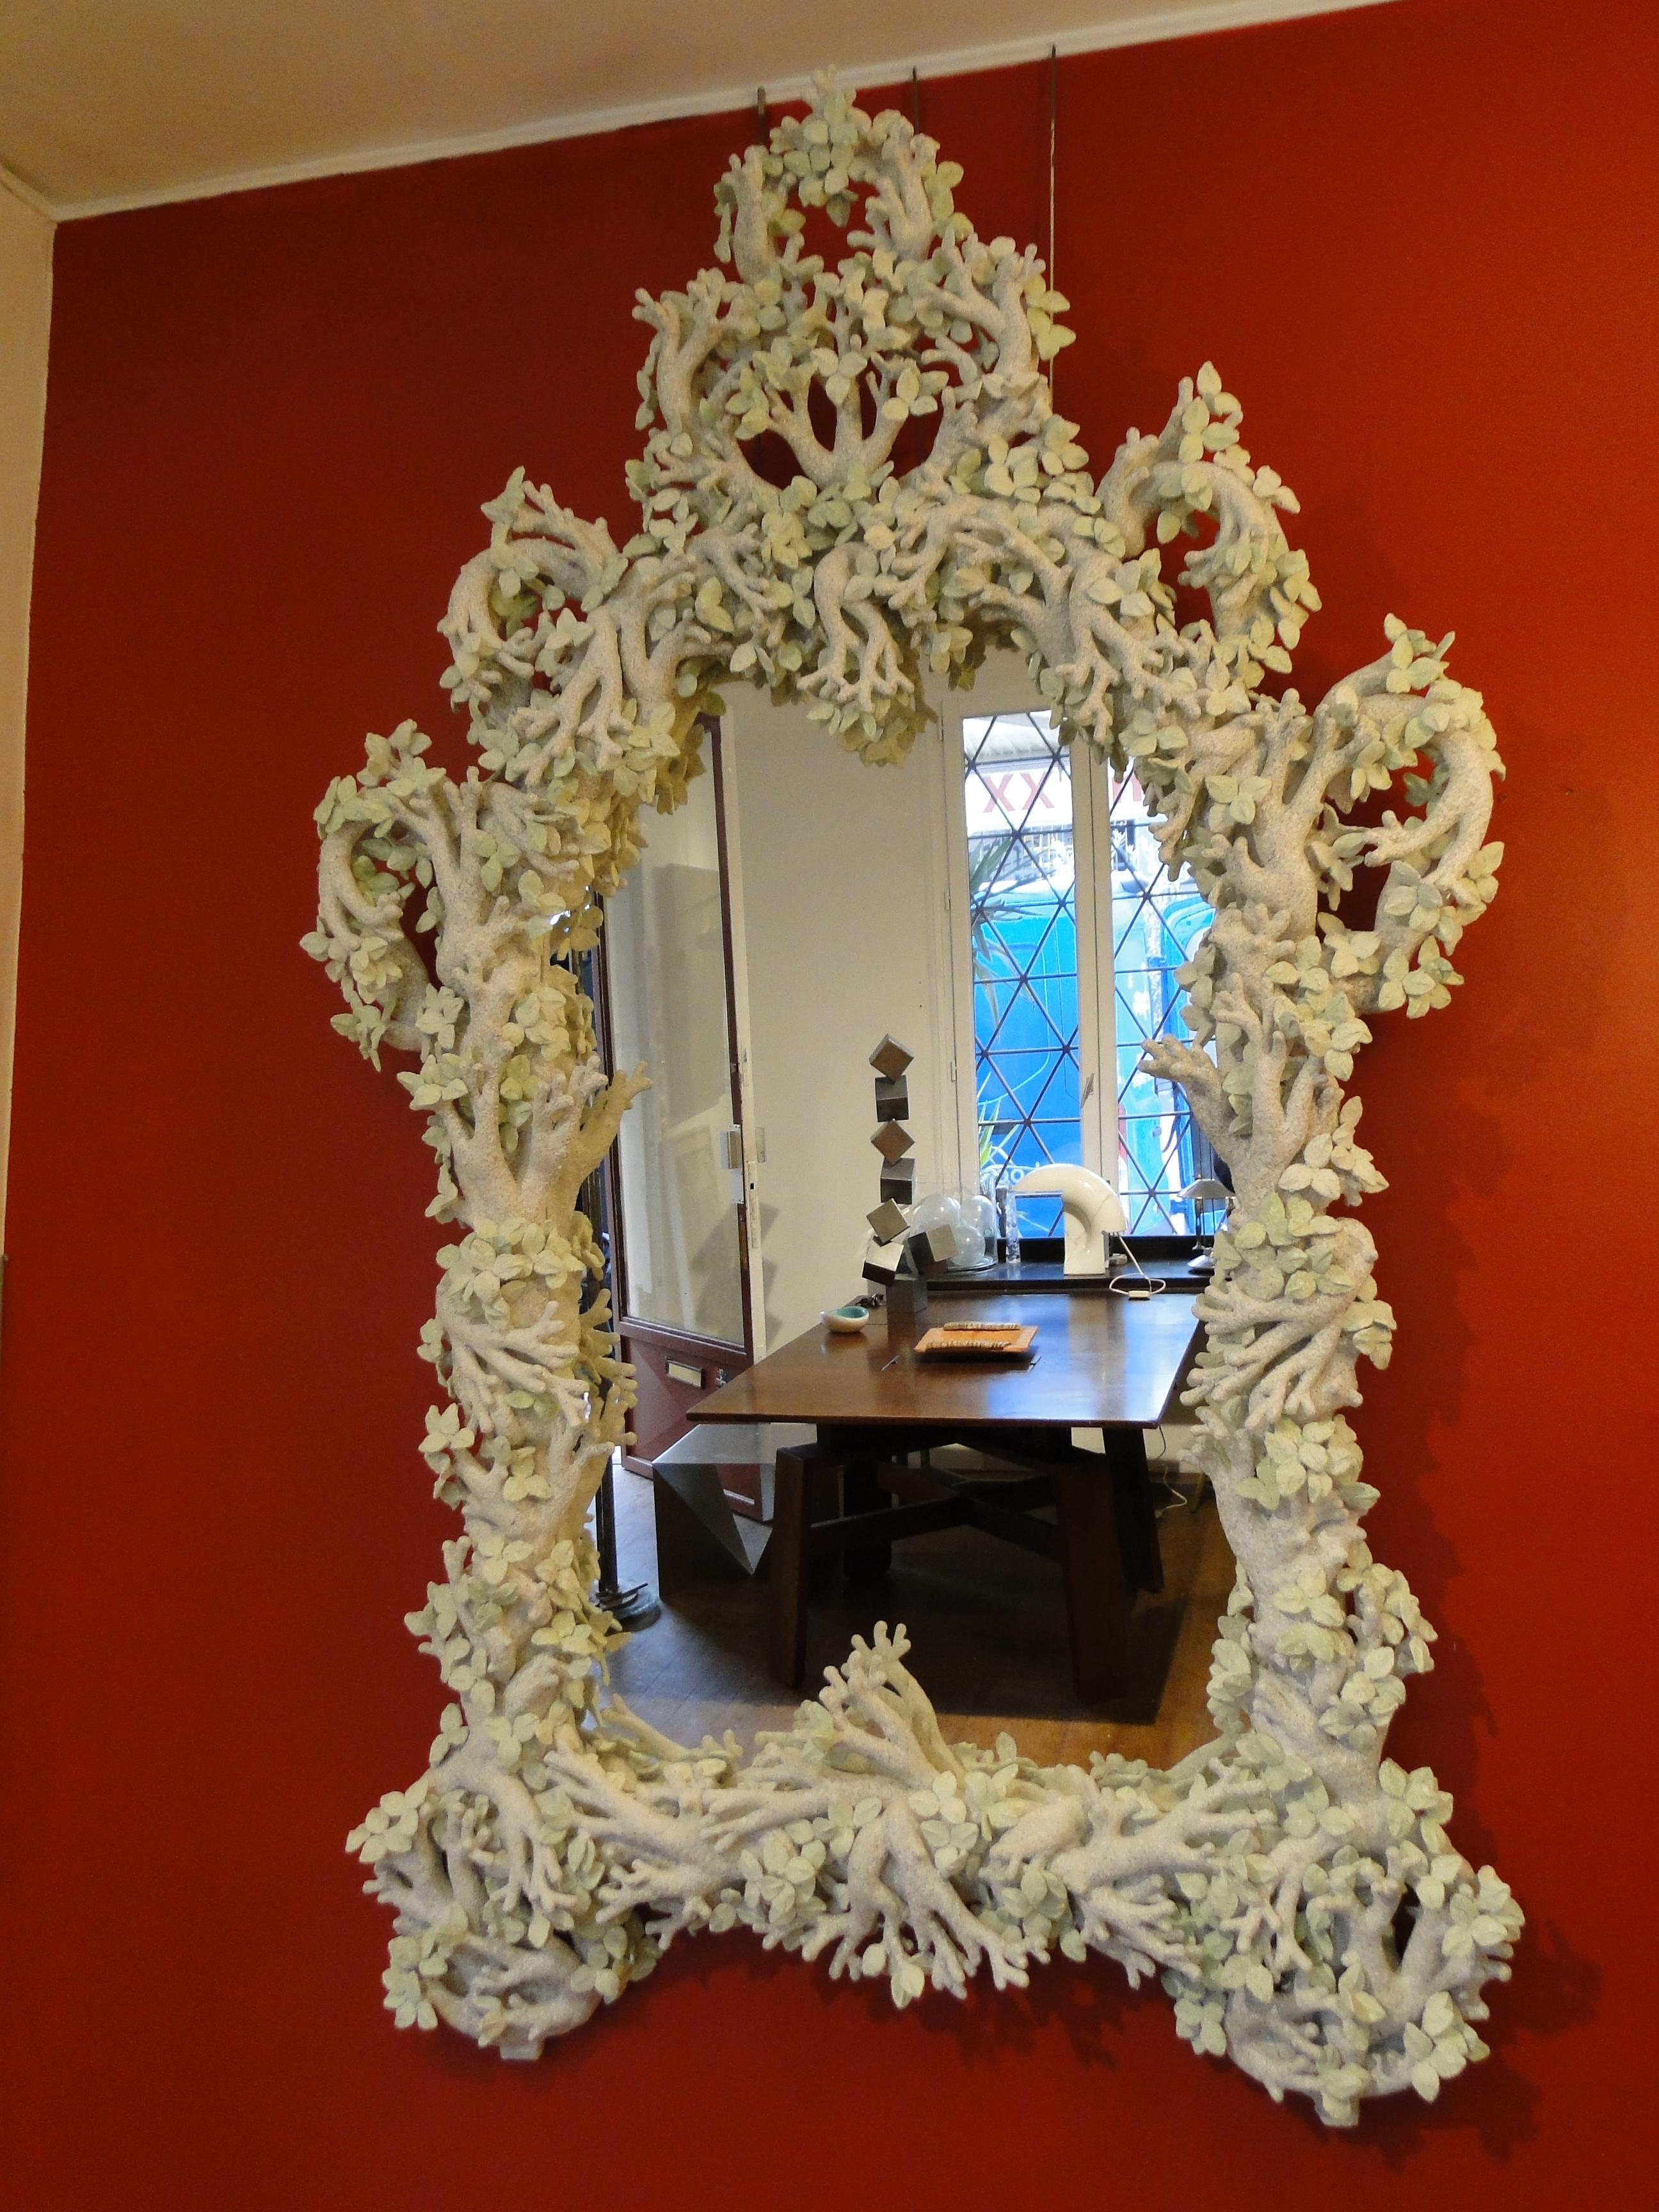 Grand and ethereal, this large scale plaster framed mirroris a showstopper.
The plaster is made up of white and green branches and leaves created in papier-mâché by the French artist Edouard Chevalier.